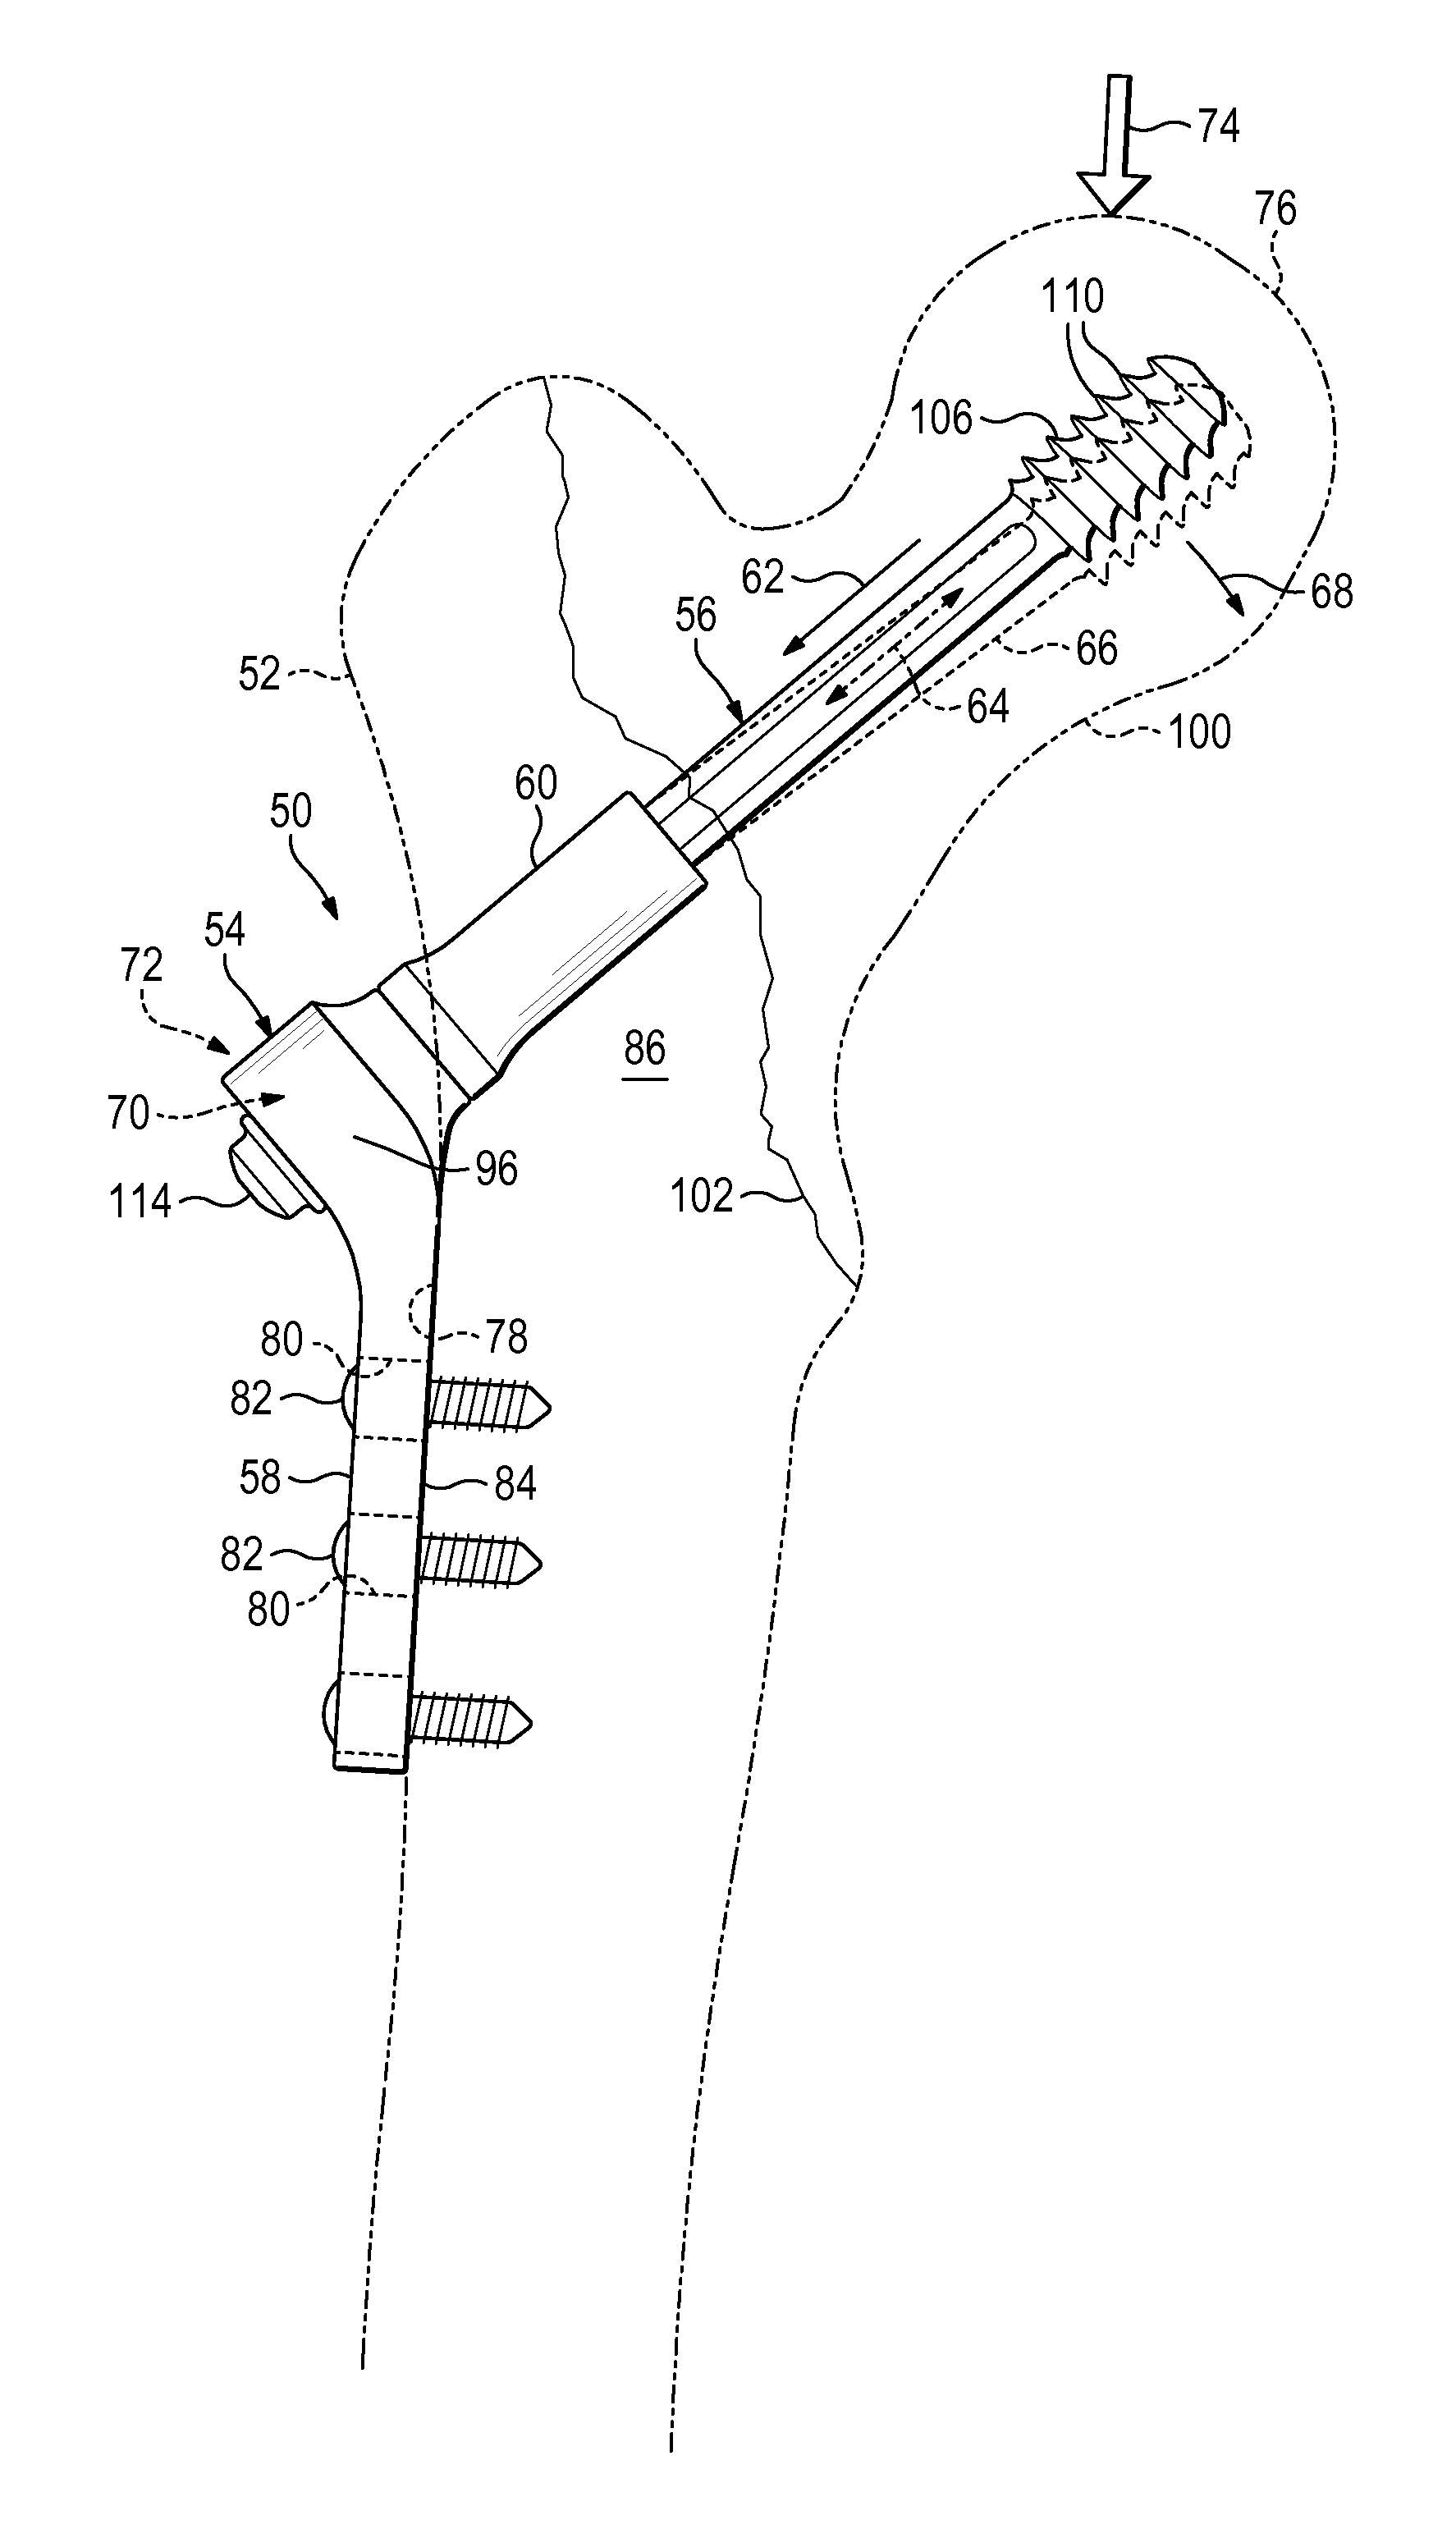 Plate-based compliant hip fixation system